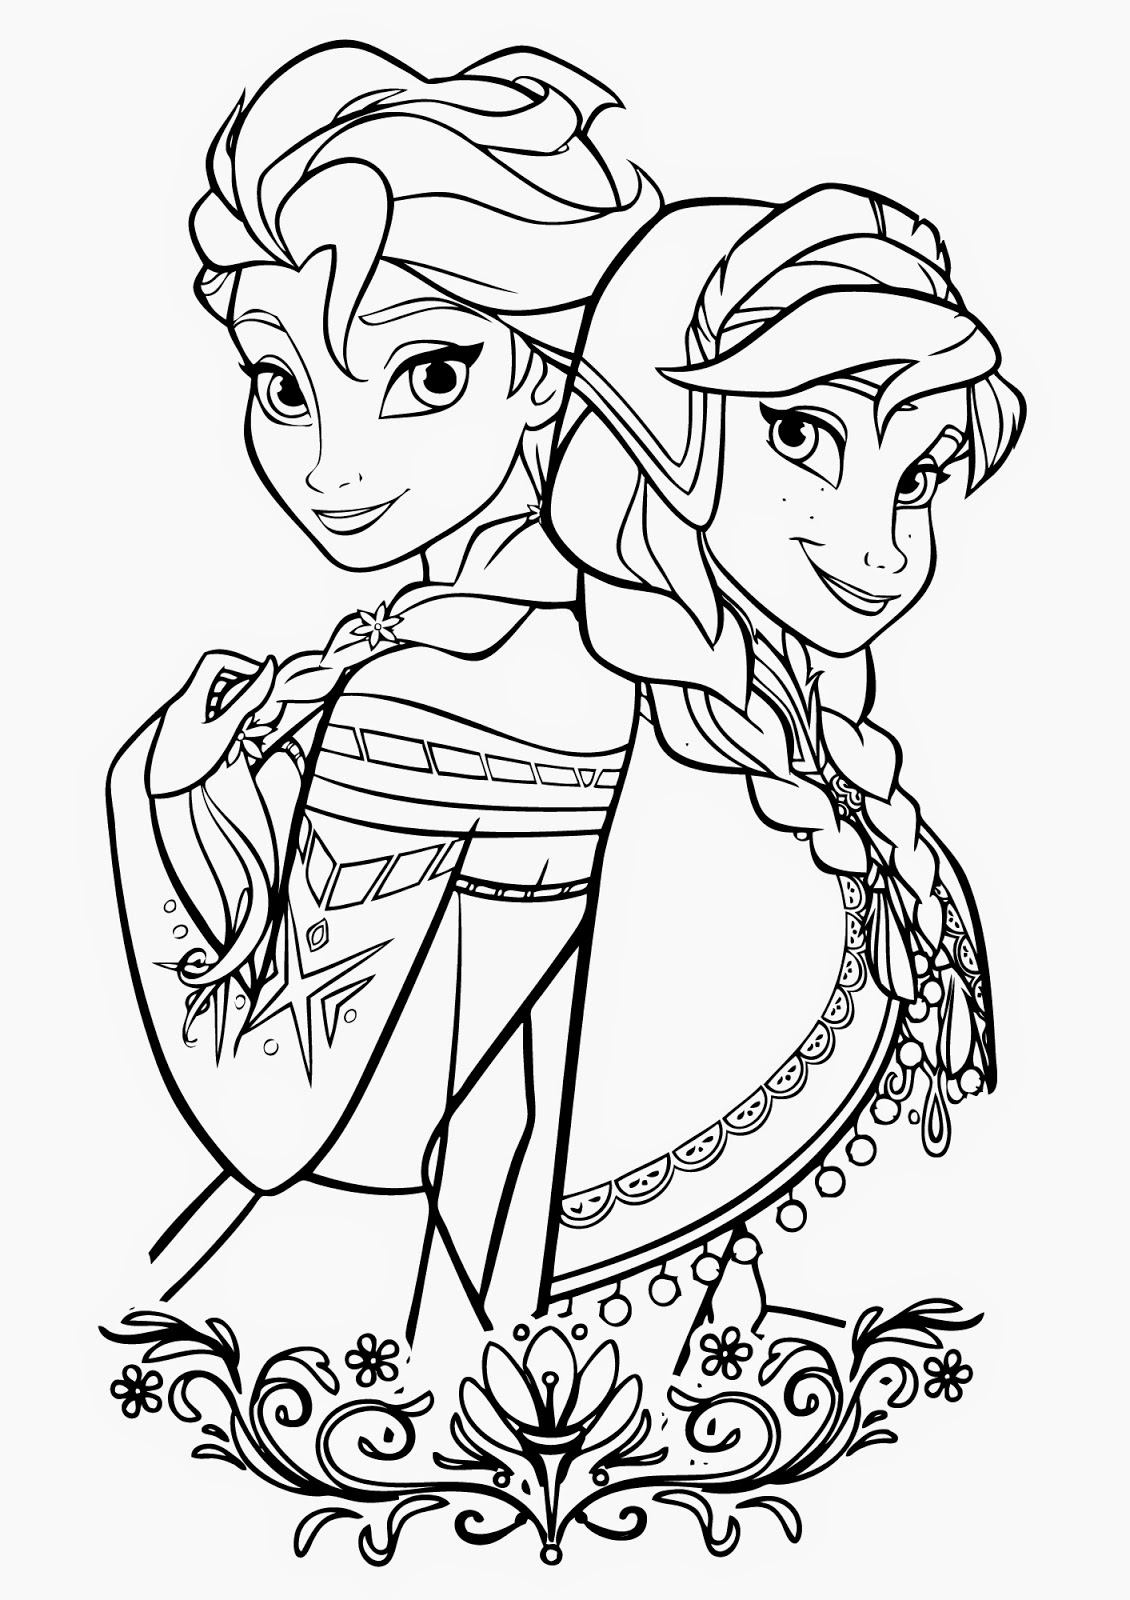 Download 15 Beautiful Disney Frozen Coloring Pages Free ~ Instant Knowledge